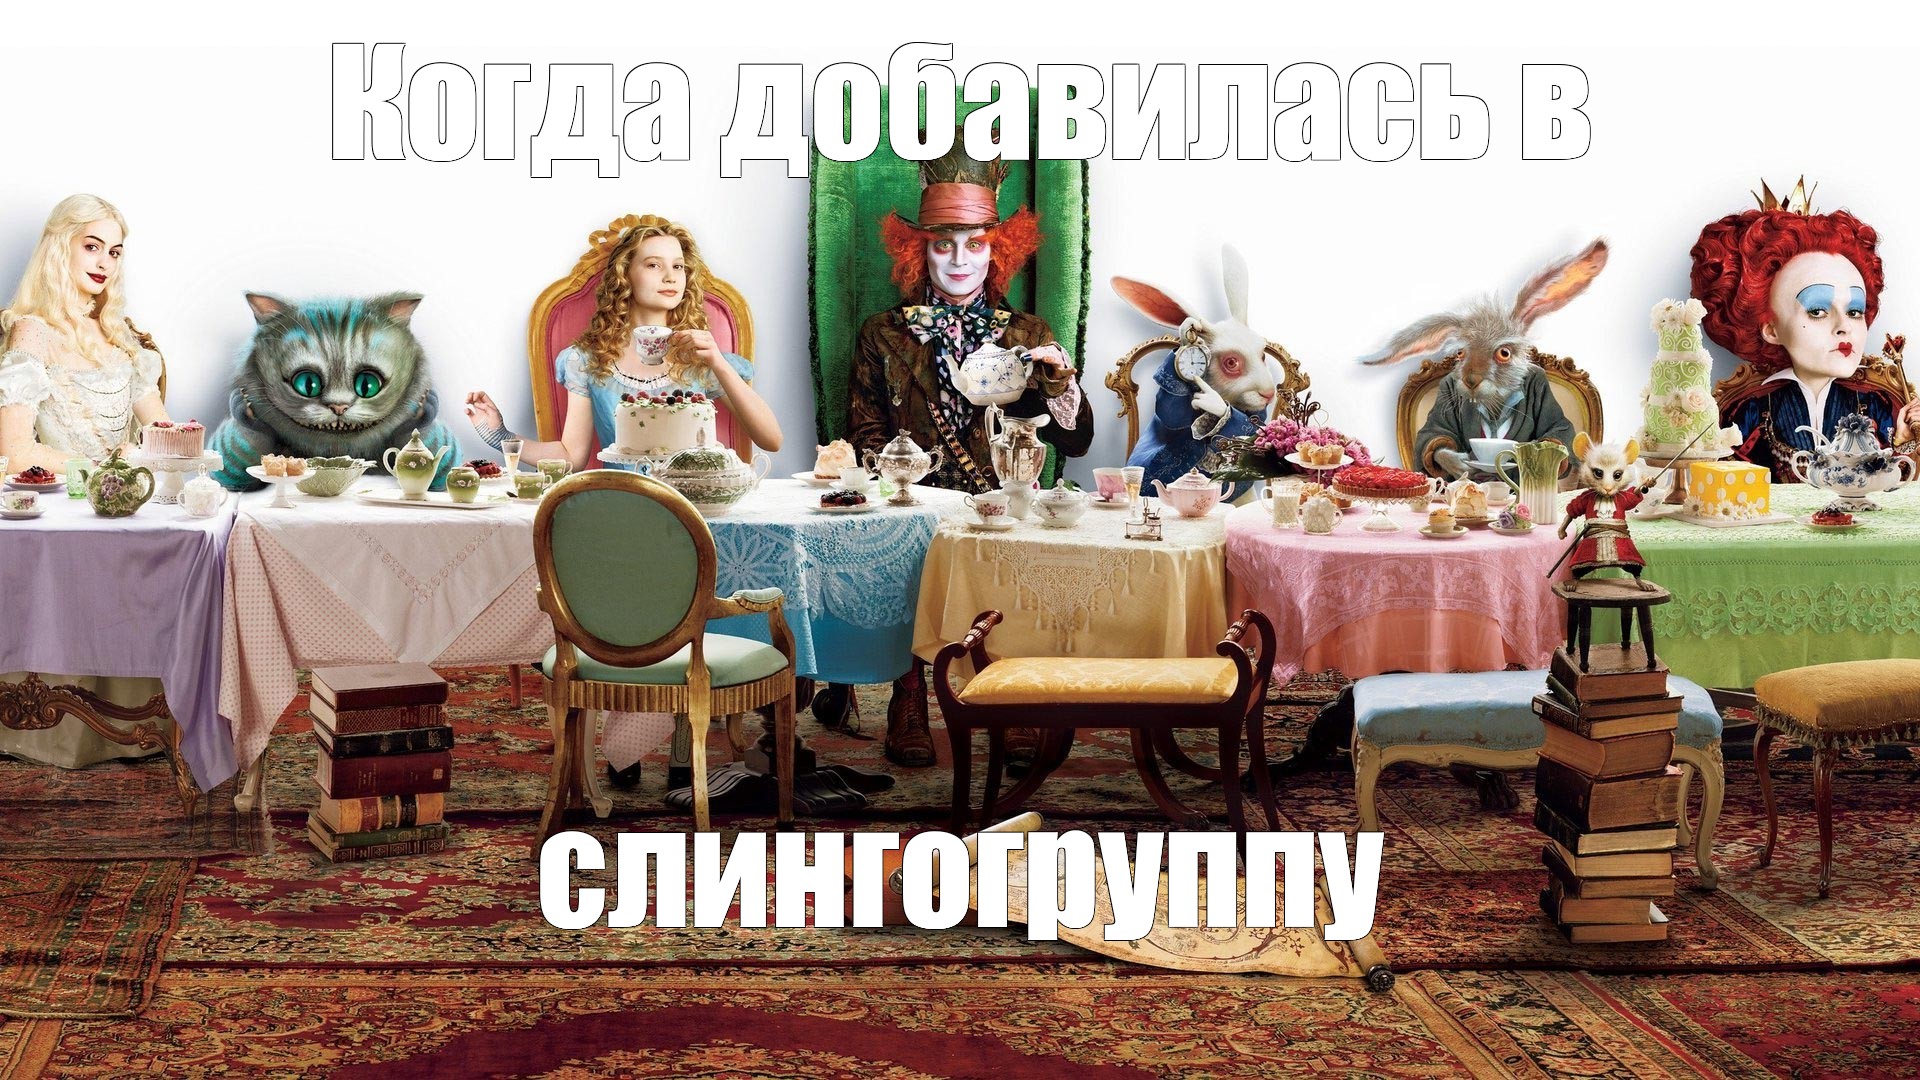 Create Meme Alice In Wonderland At The Table Alice In Wonderland Tea Party The Mad Hatter Tea Party Pictures Meme Arsenal Com